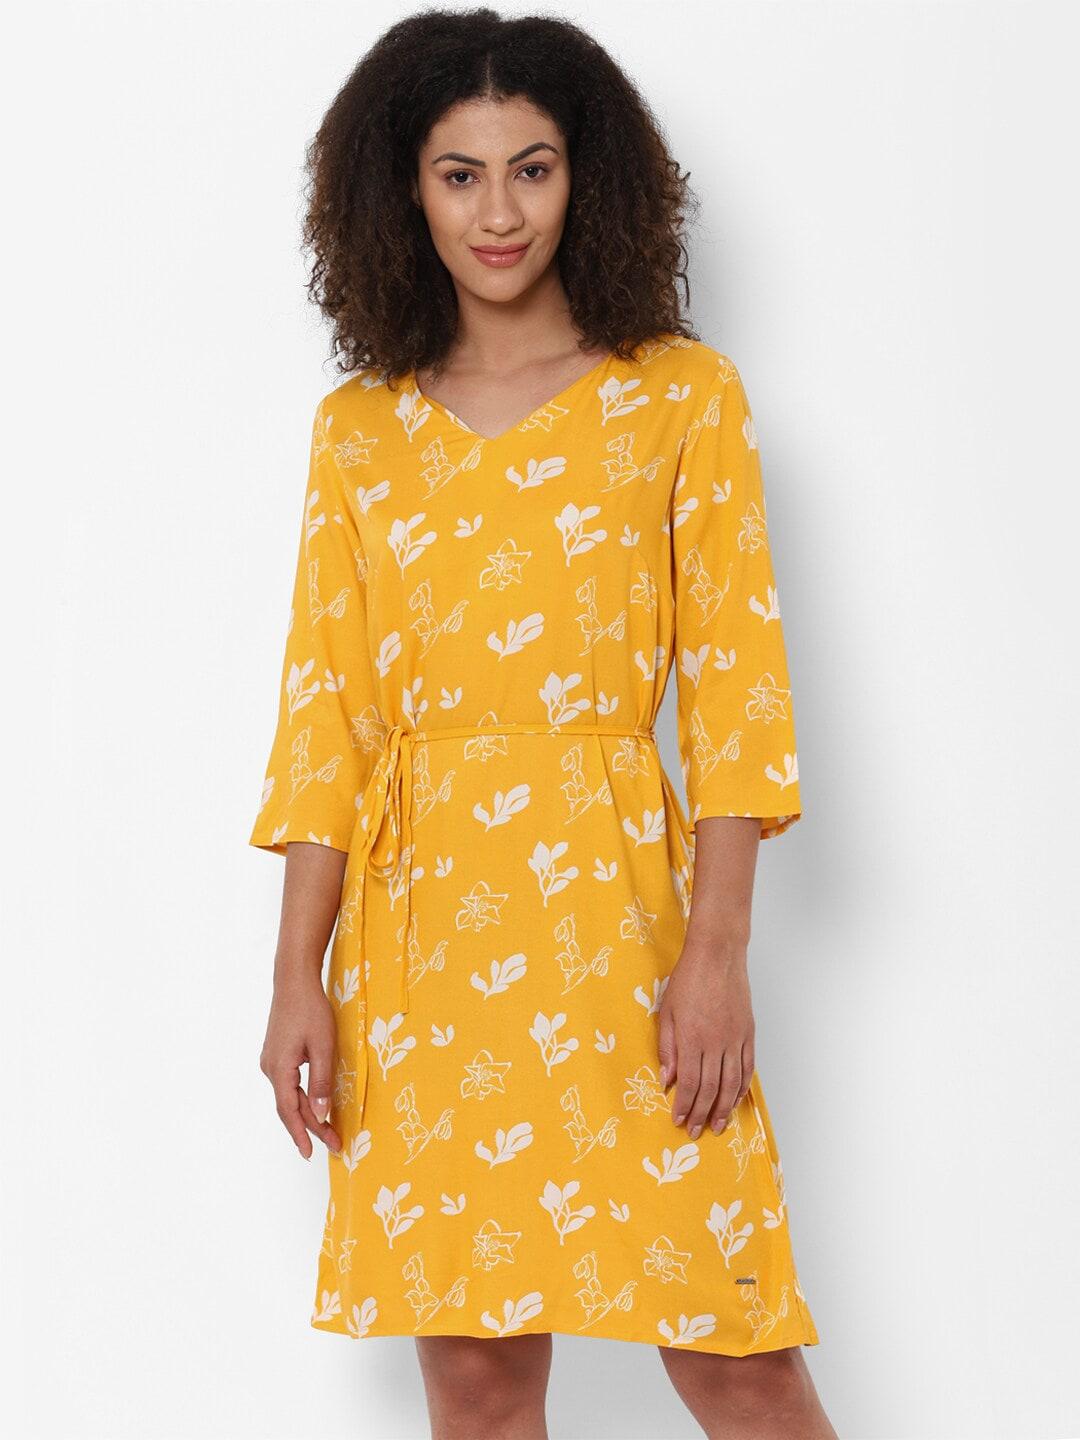 allen-solly-woman-yellow-floral-a-line-dress